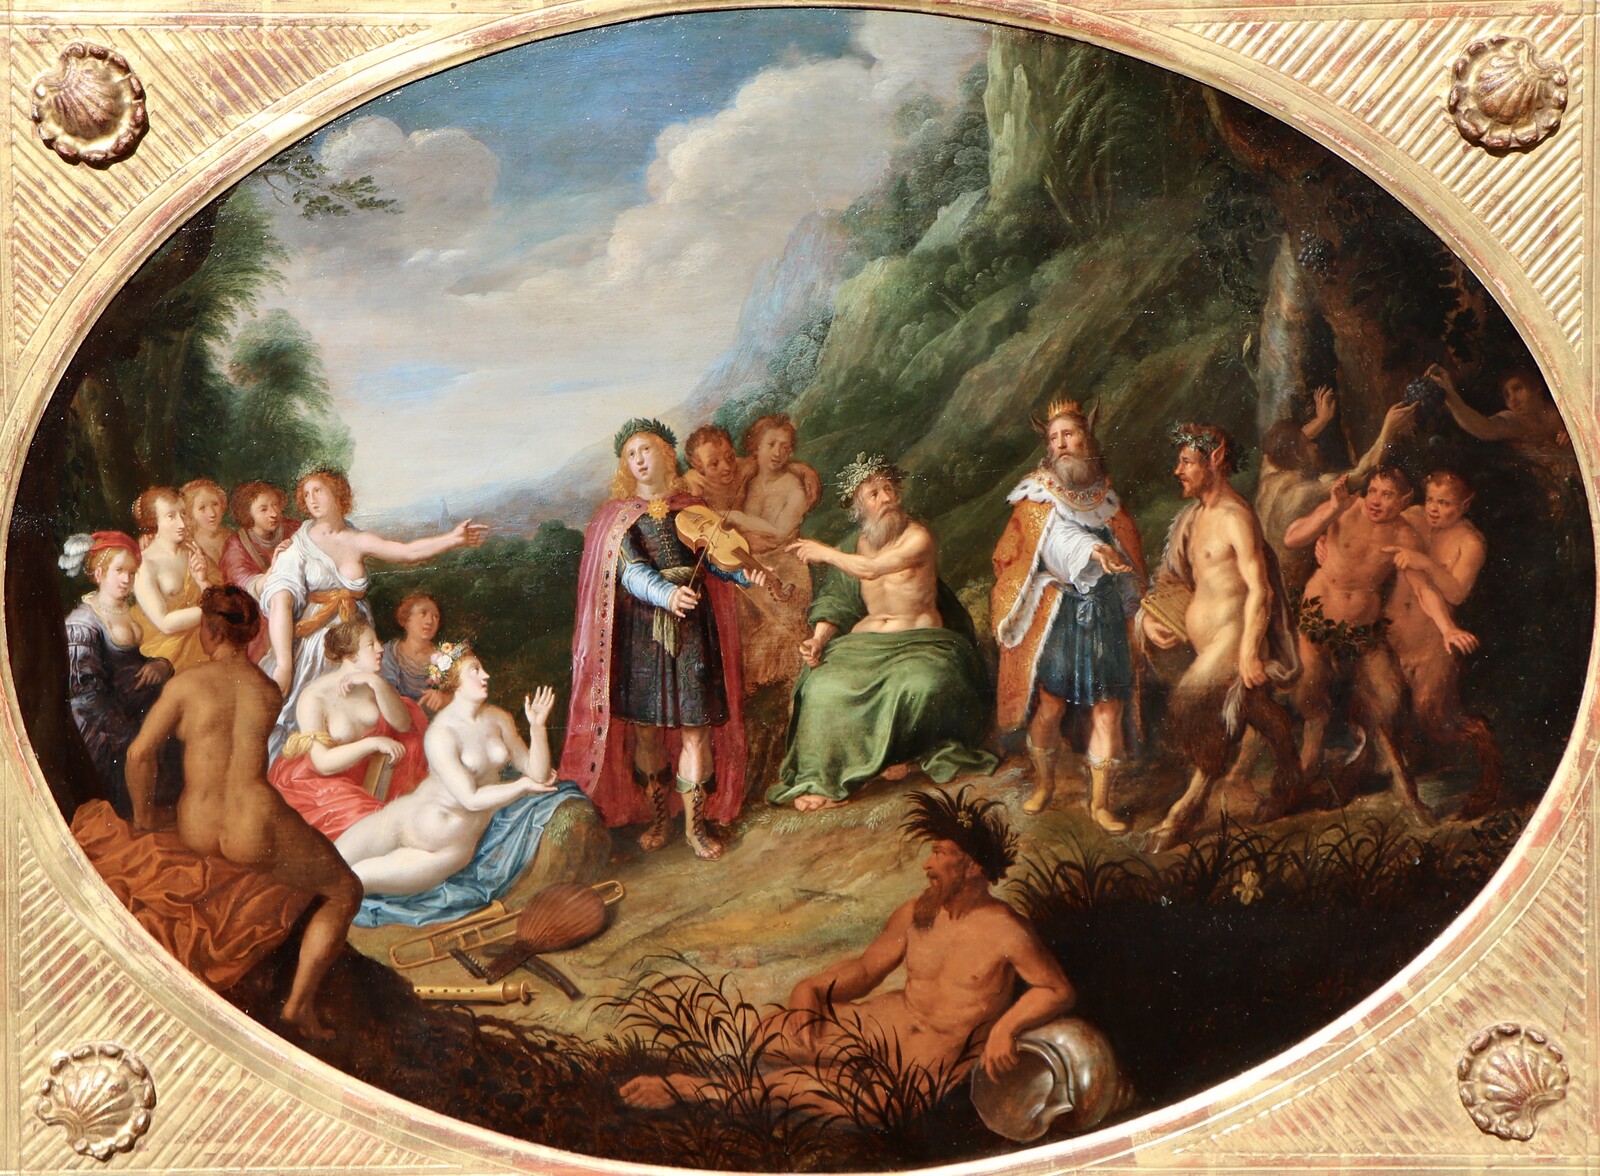 The musical contest between Pan and Apollo